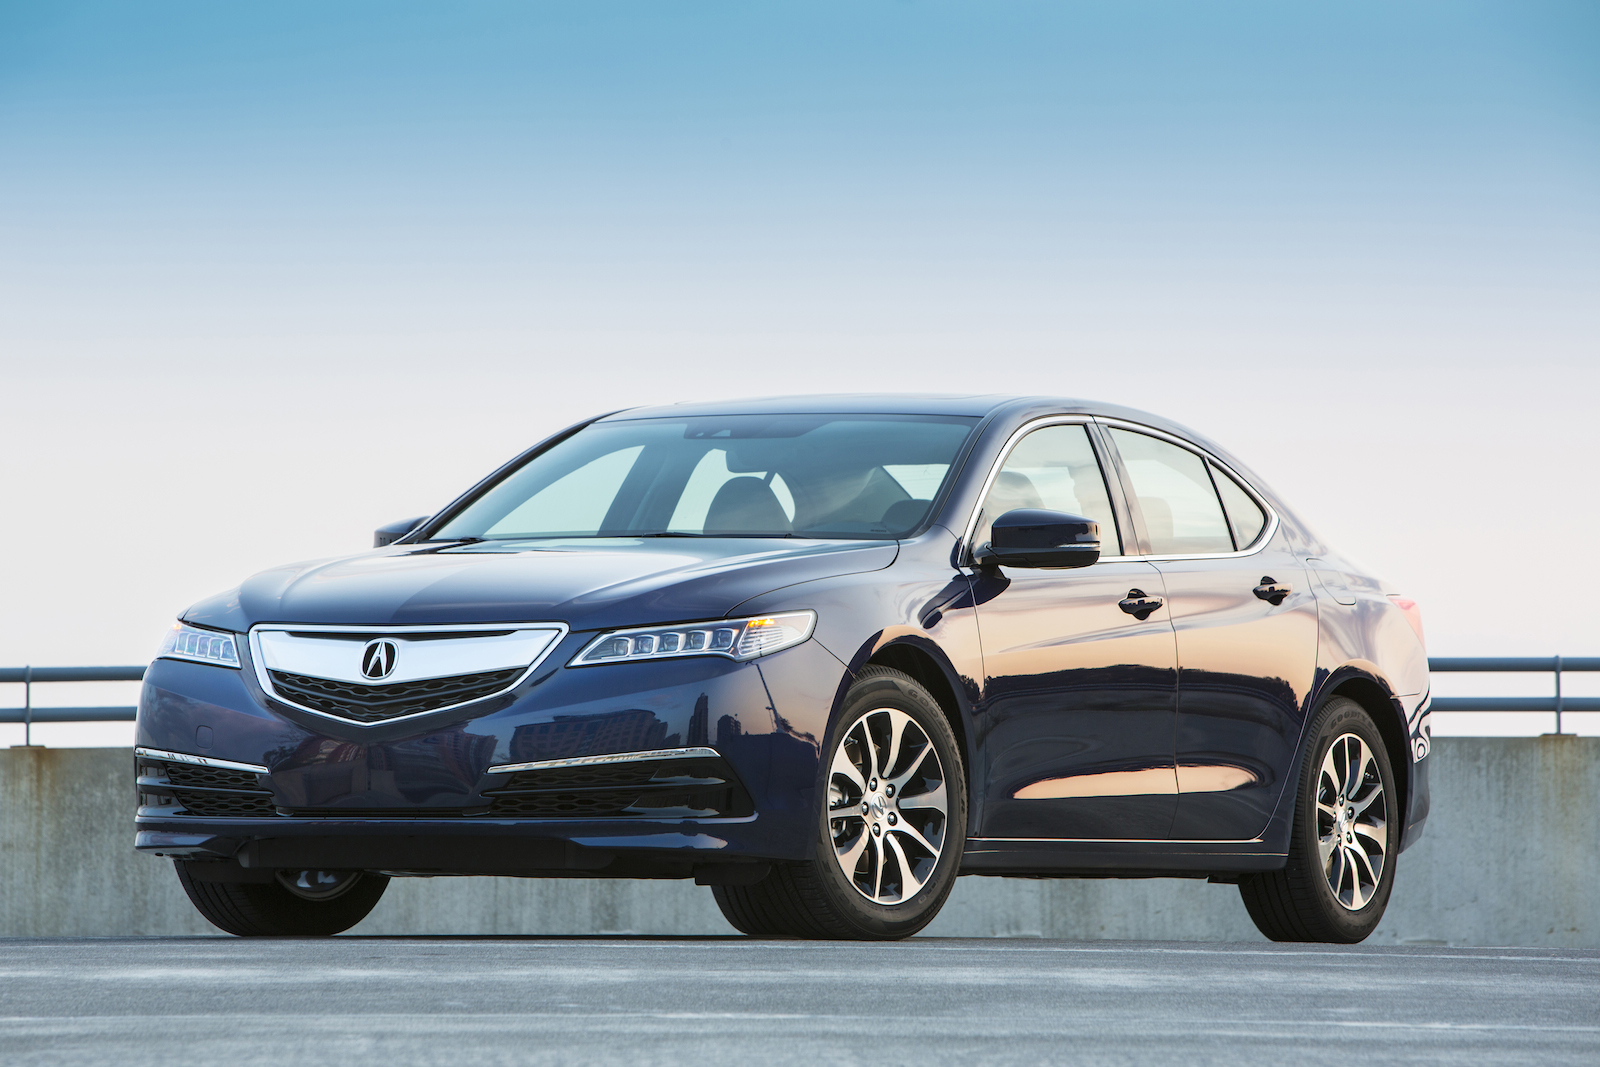 2015 Acura TLX first drive review